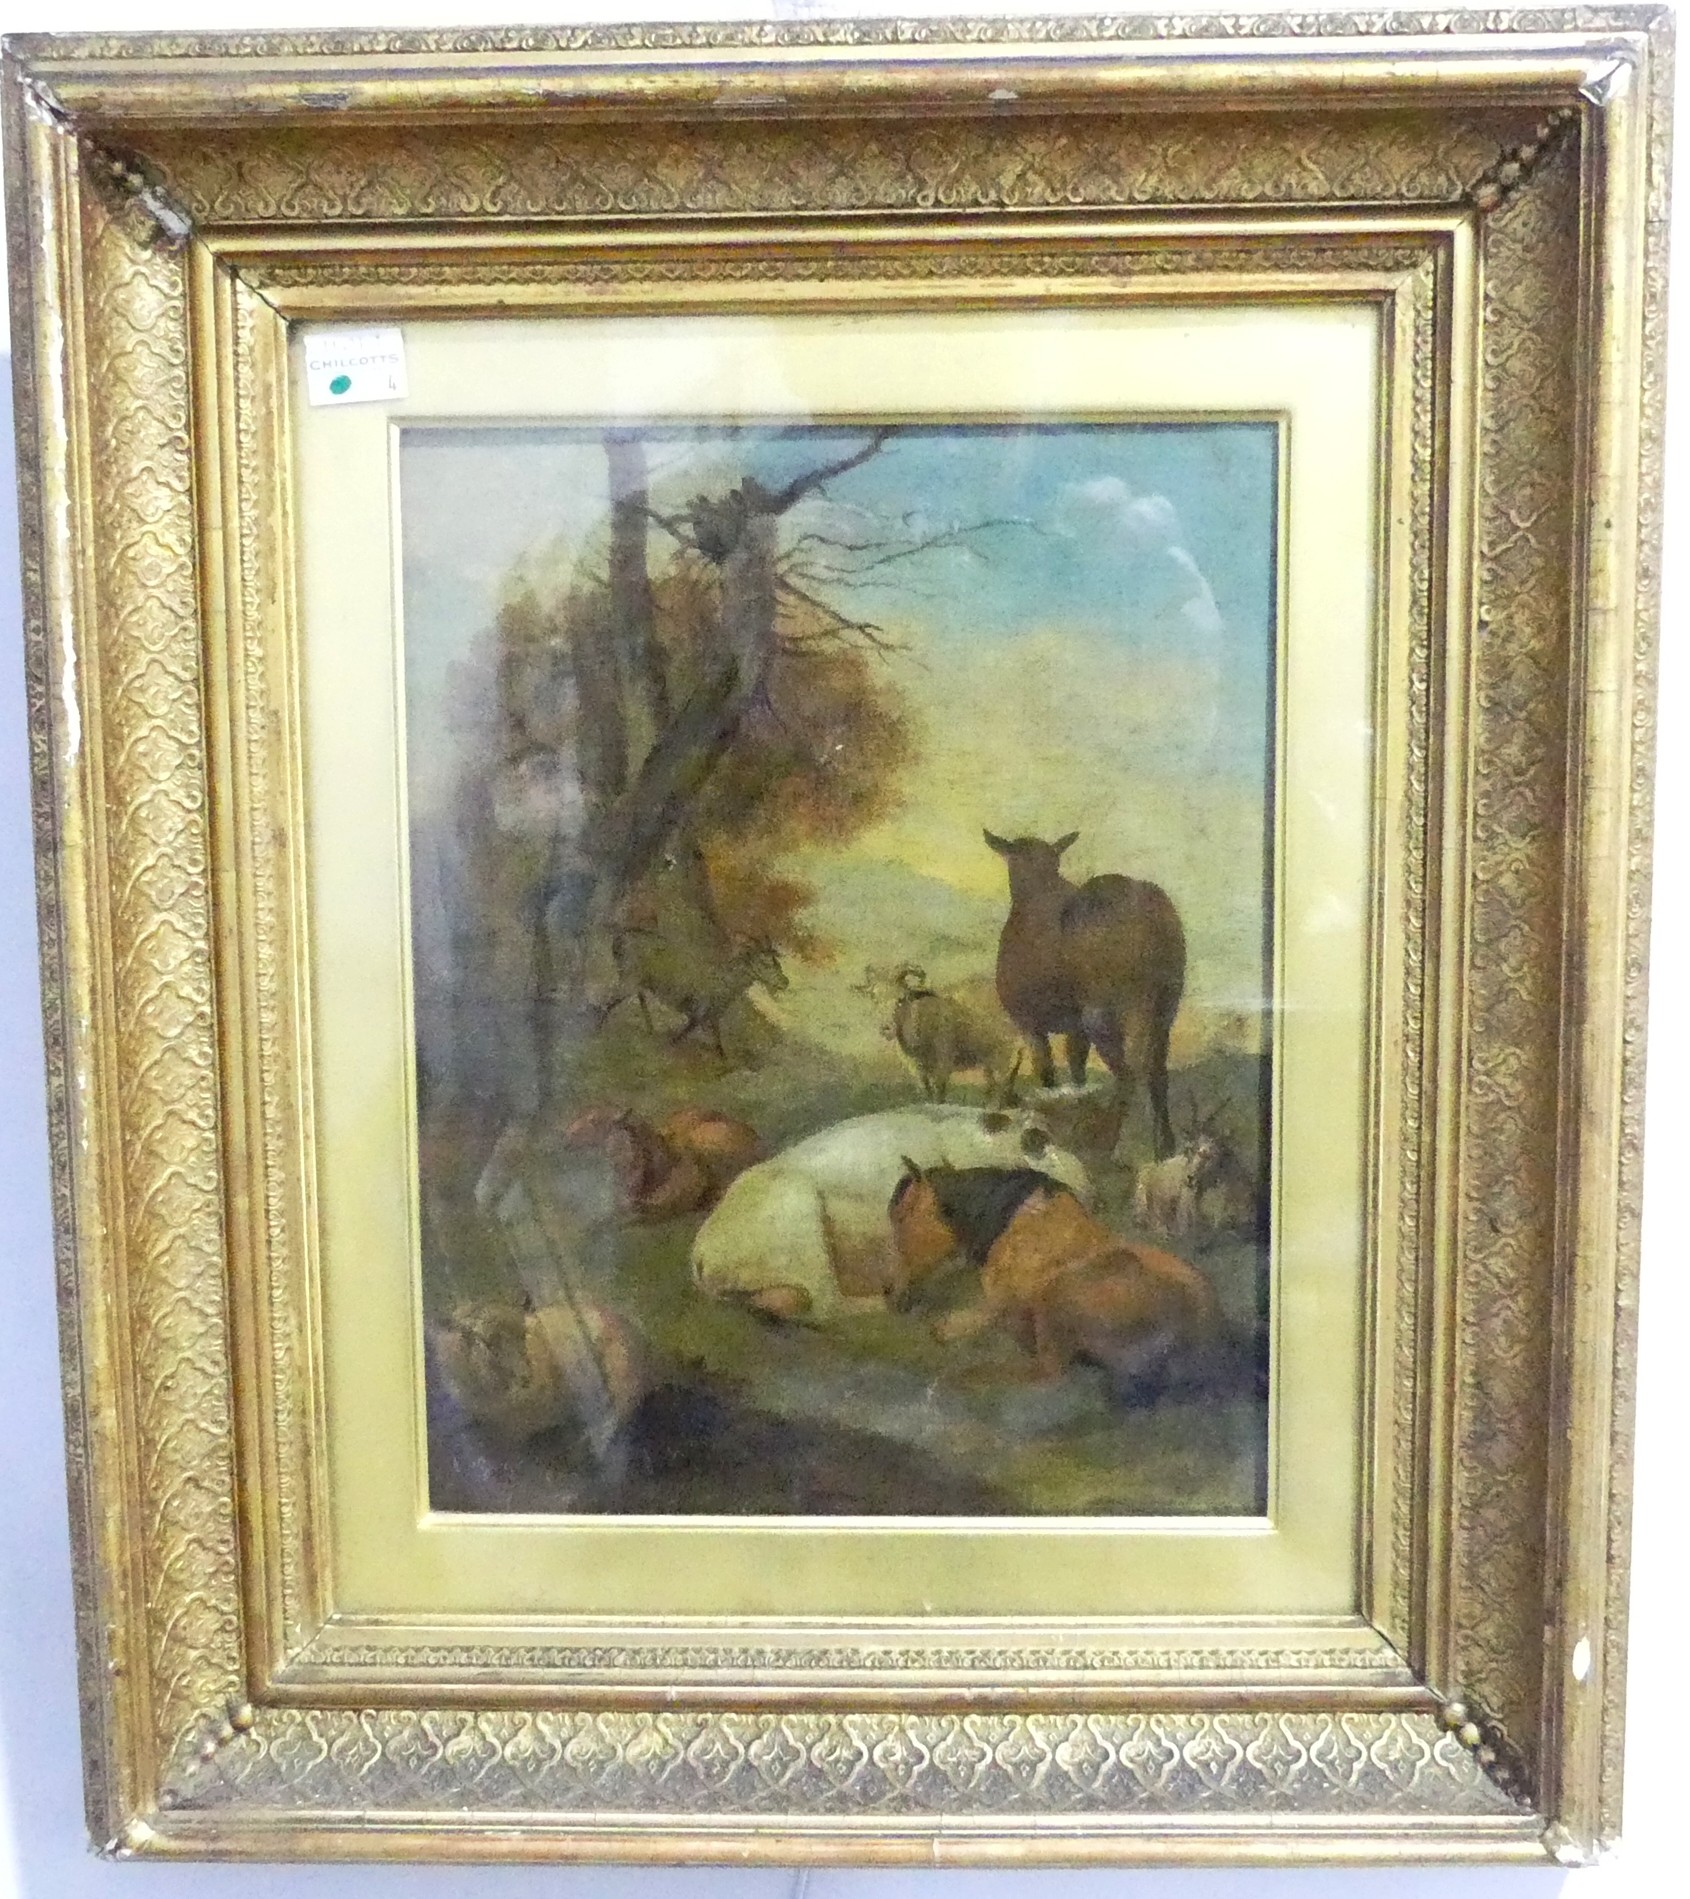 18th century Continental School, Cattle, Bergham, oil on panel, titled on label verso, 28cm x